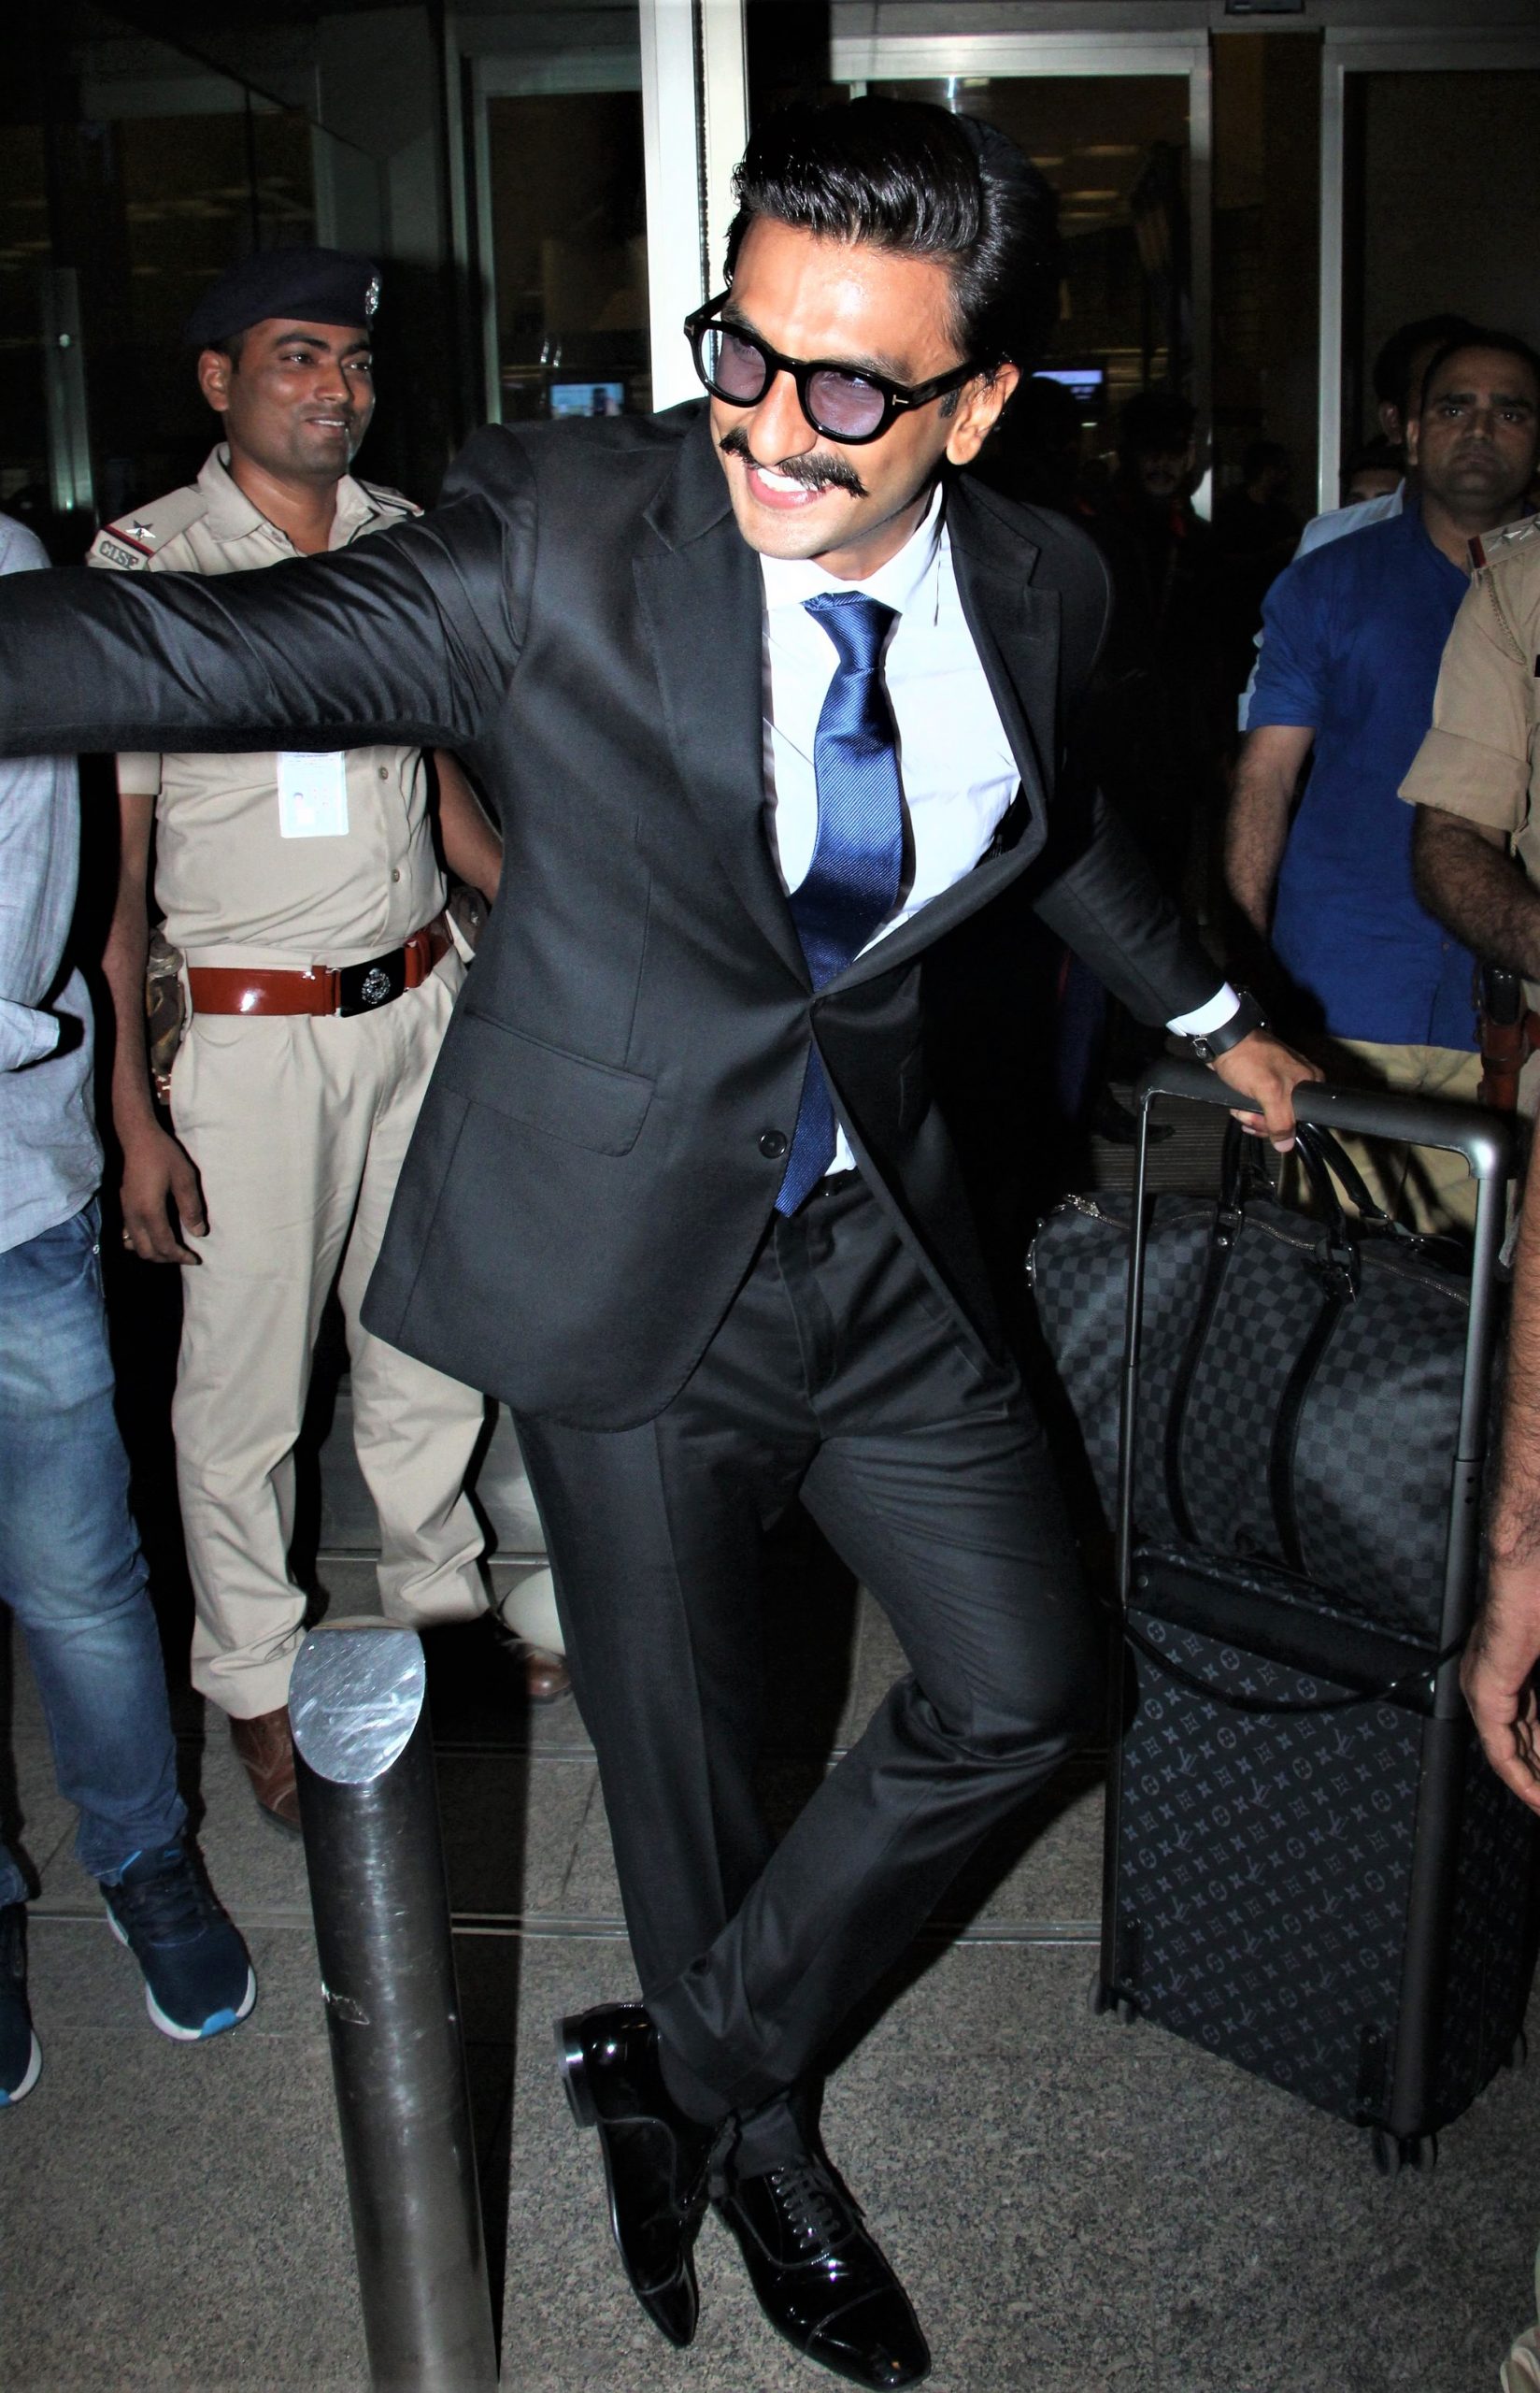 Ranveer Singh looks dapper in a blue suit as he poses for the paparazzi